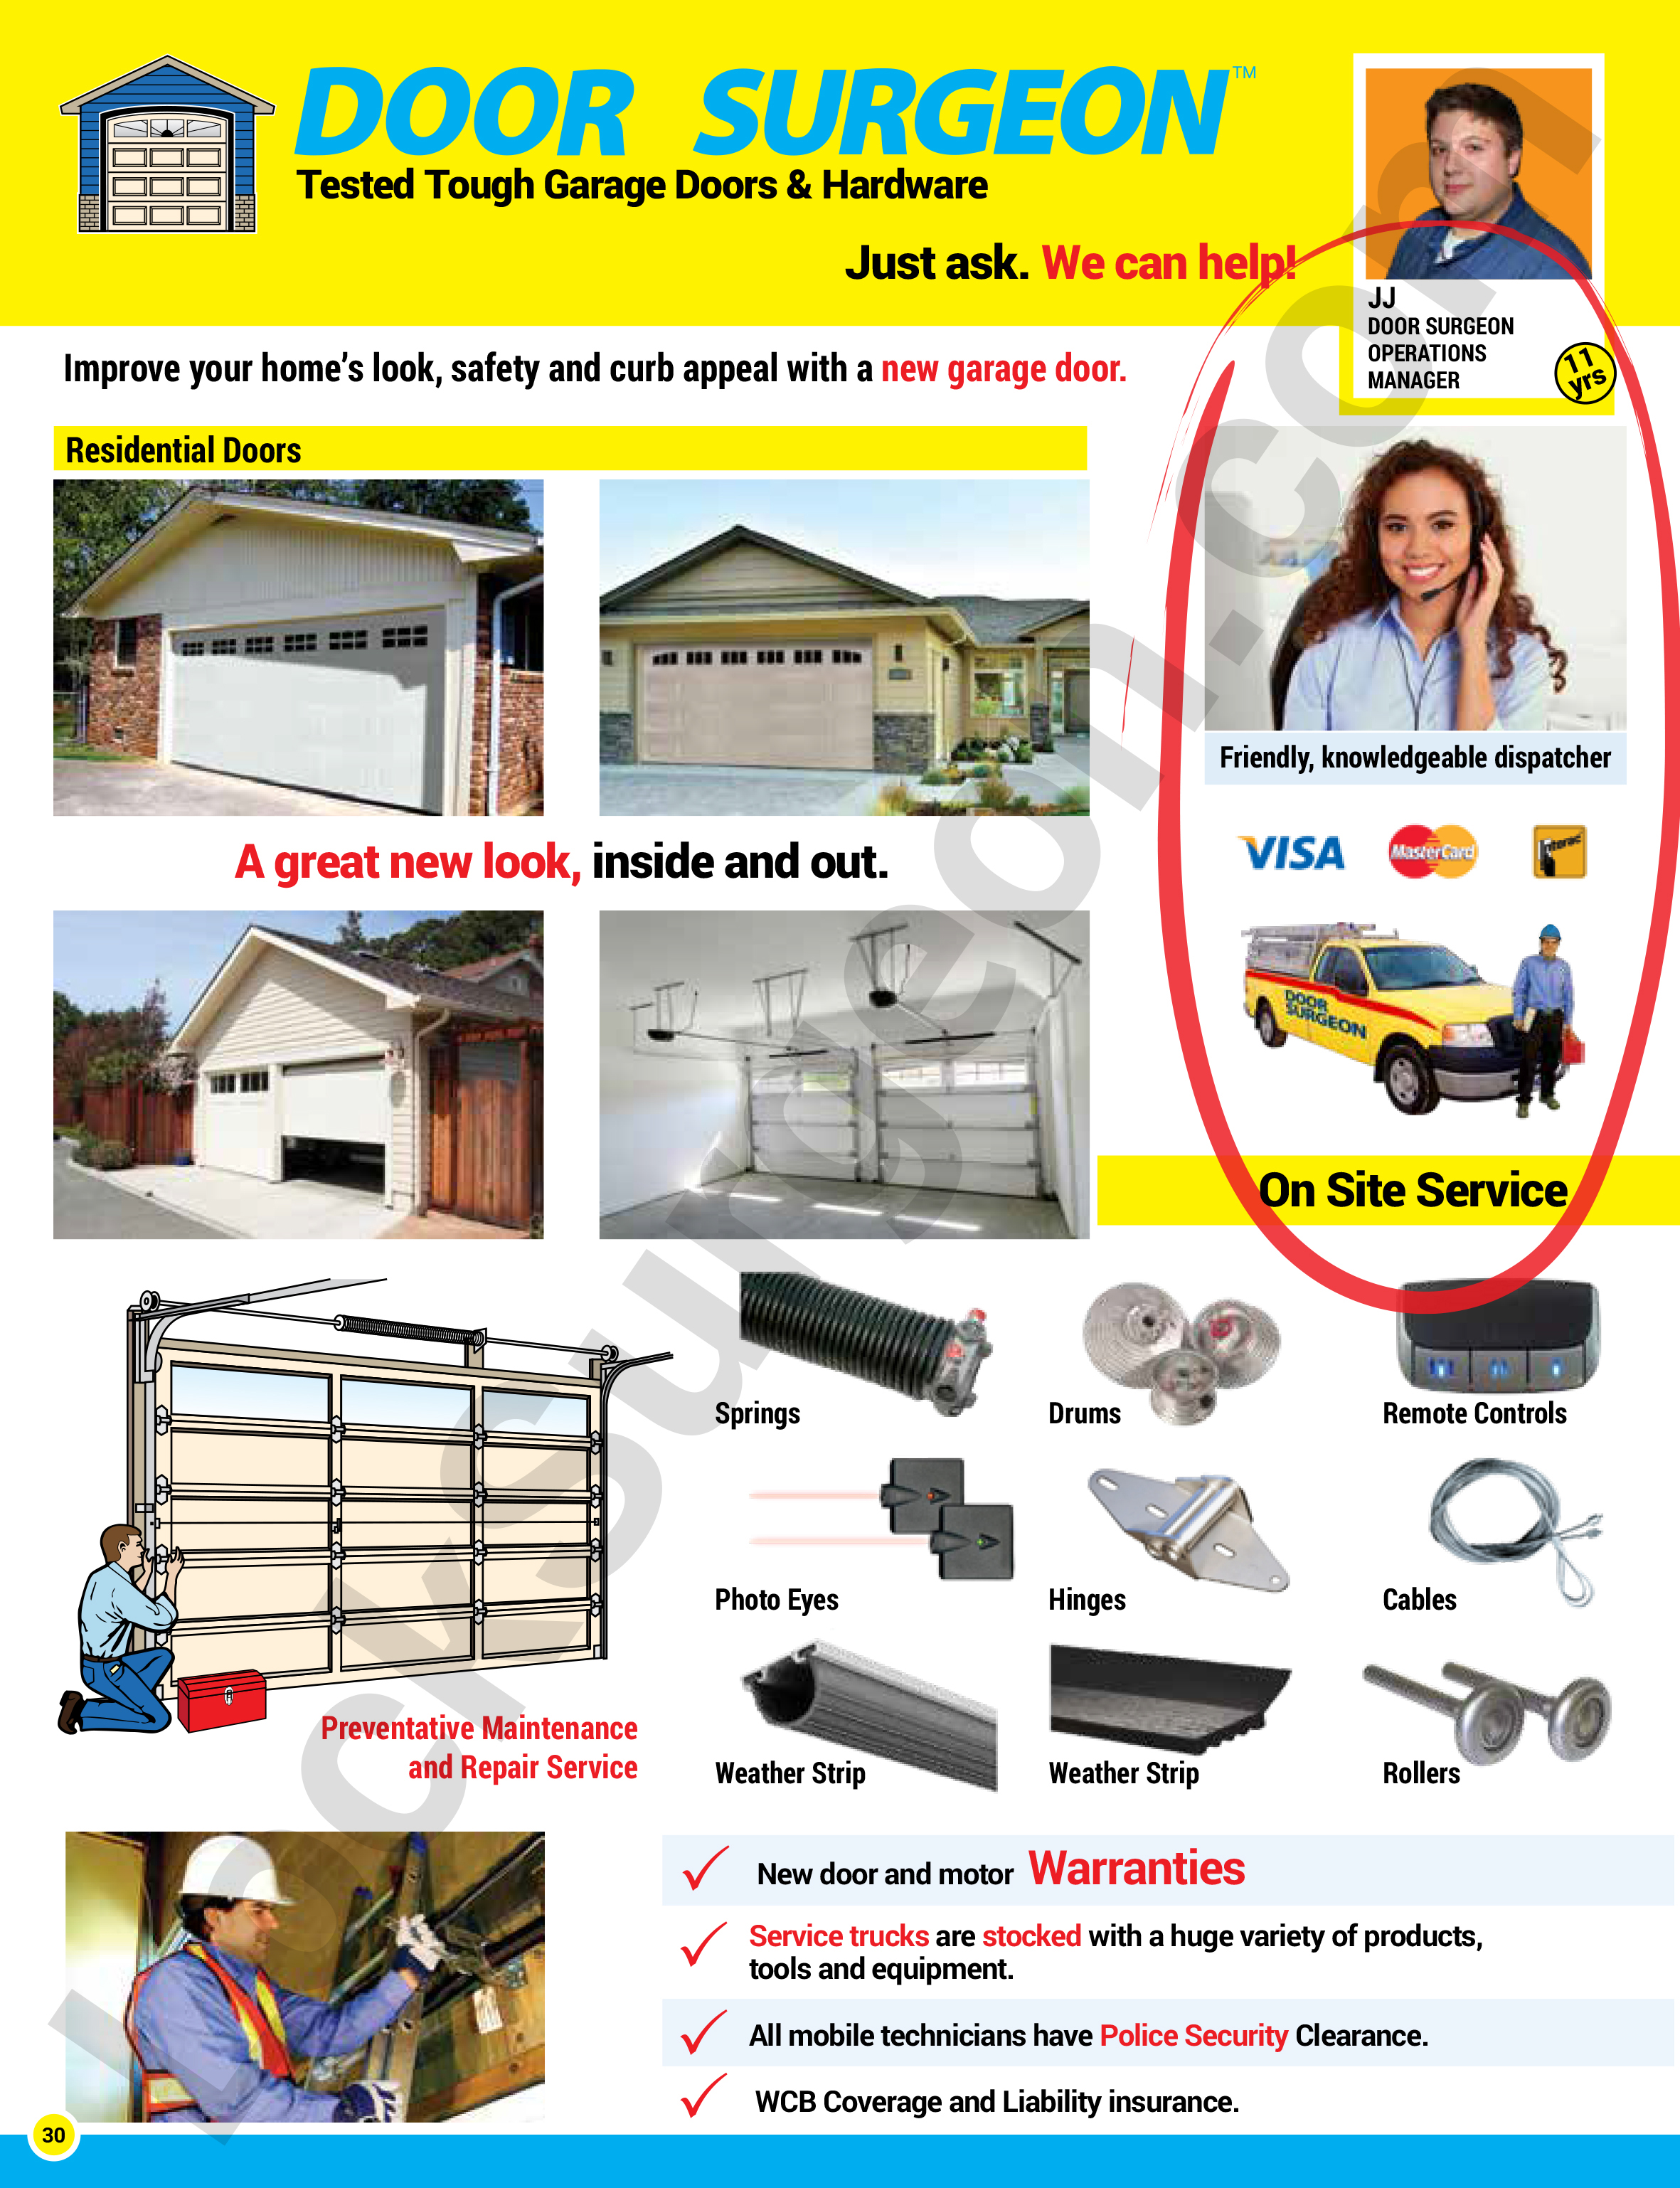 Lock Surgeon Edmonton tested tough residential and commercial garage doors and hardware.